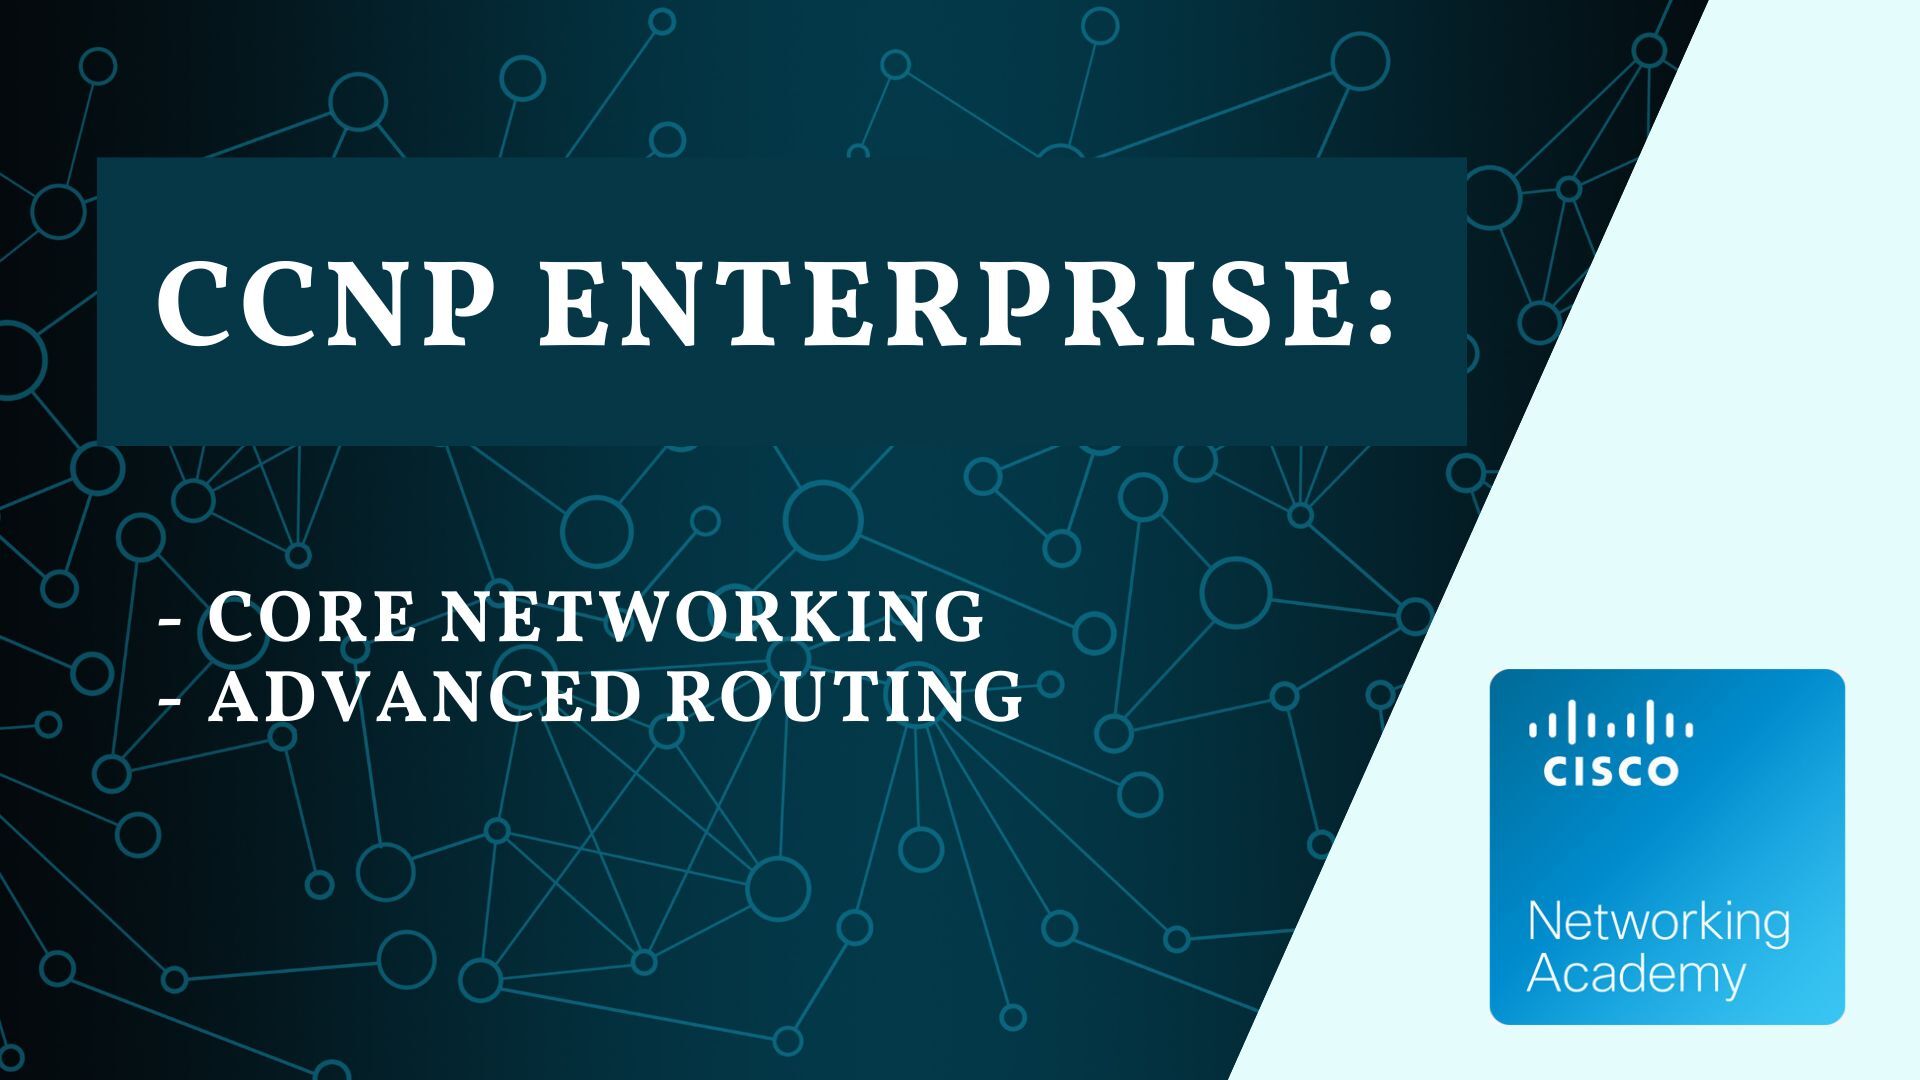 CCNP Enterprise: Core Networking and Advanced Routing CCNPEnterpriseCoreNetworking